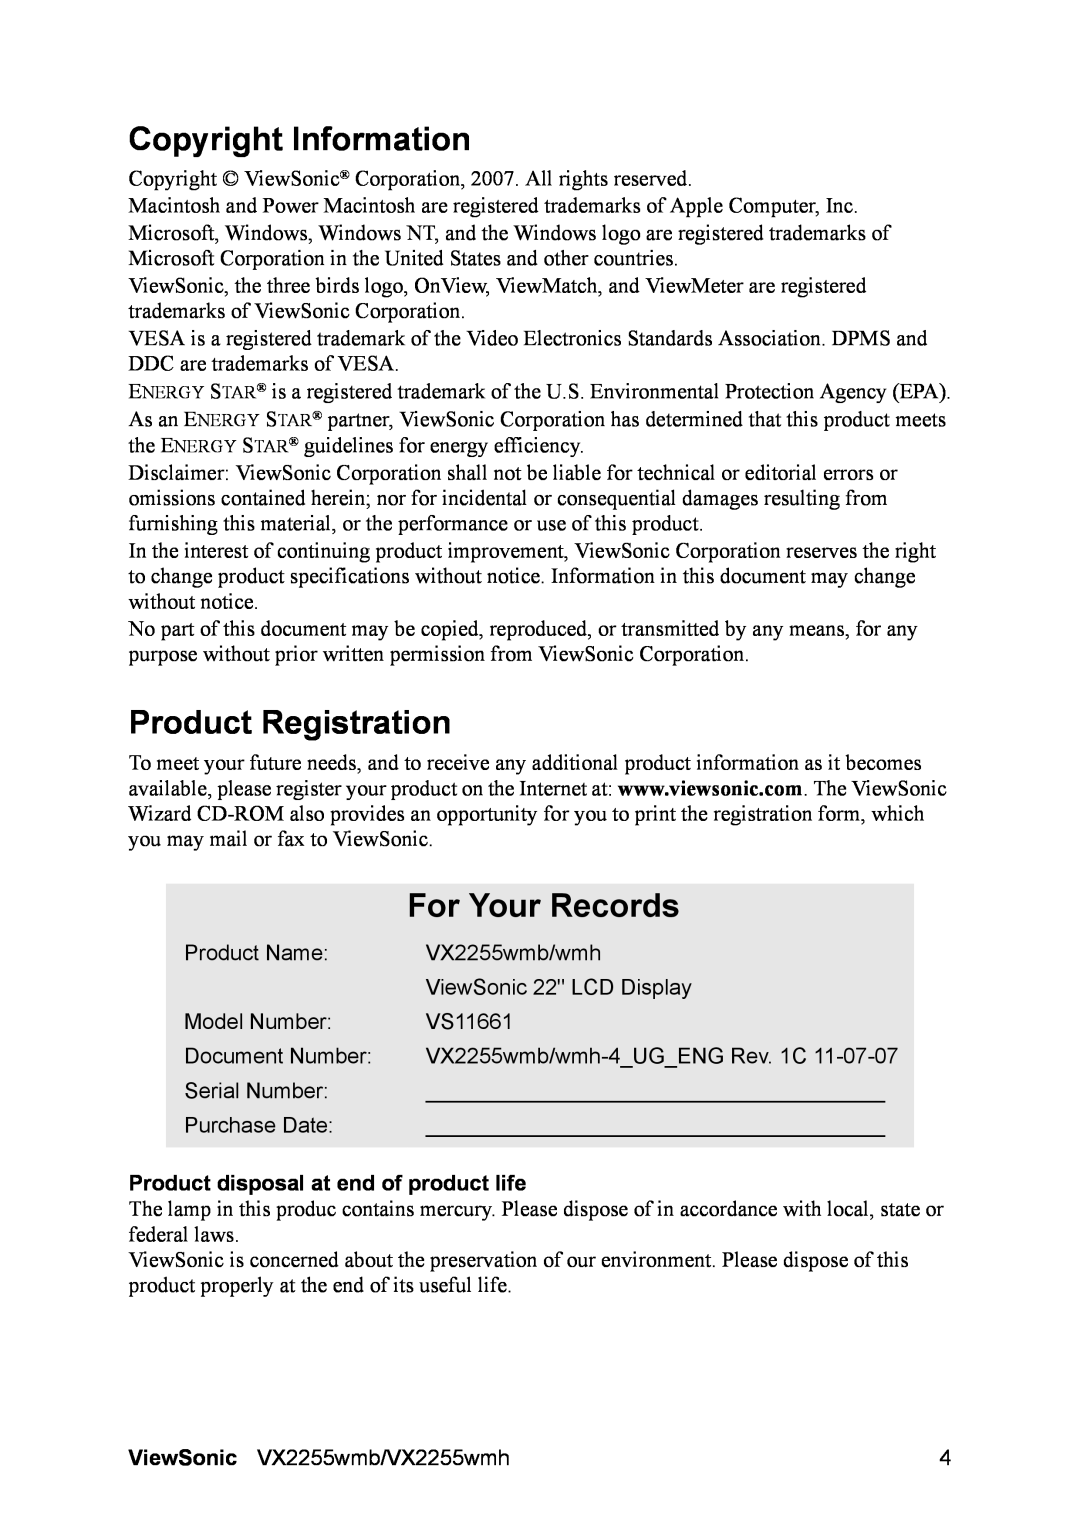 ViewSonic VX2255wmb Copyright Information, Product Registration, For Your Records, Product disposal at end of product life 